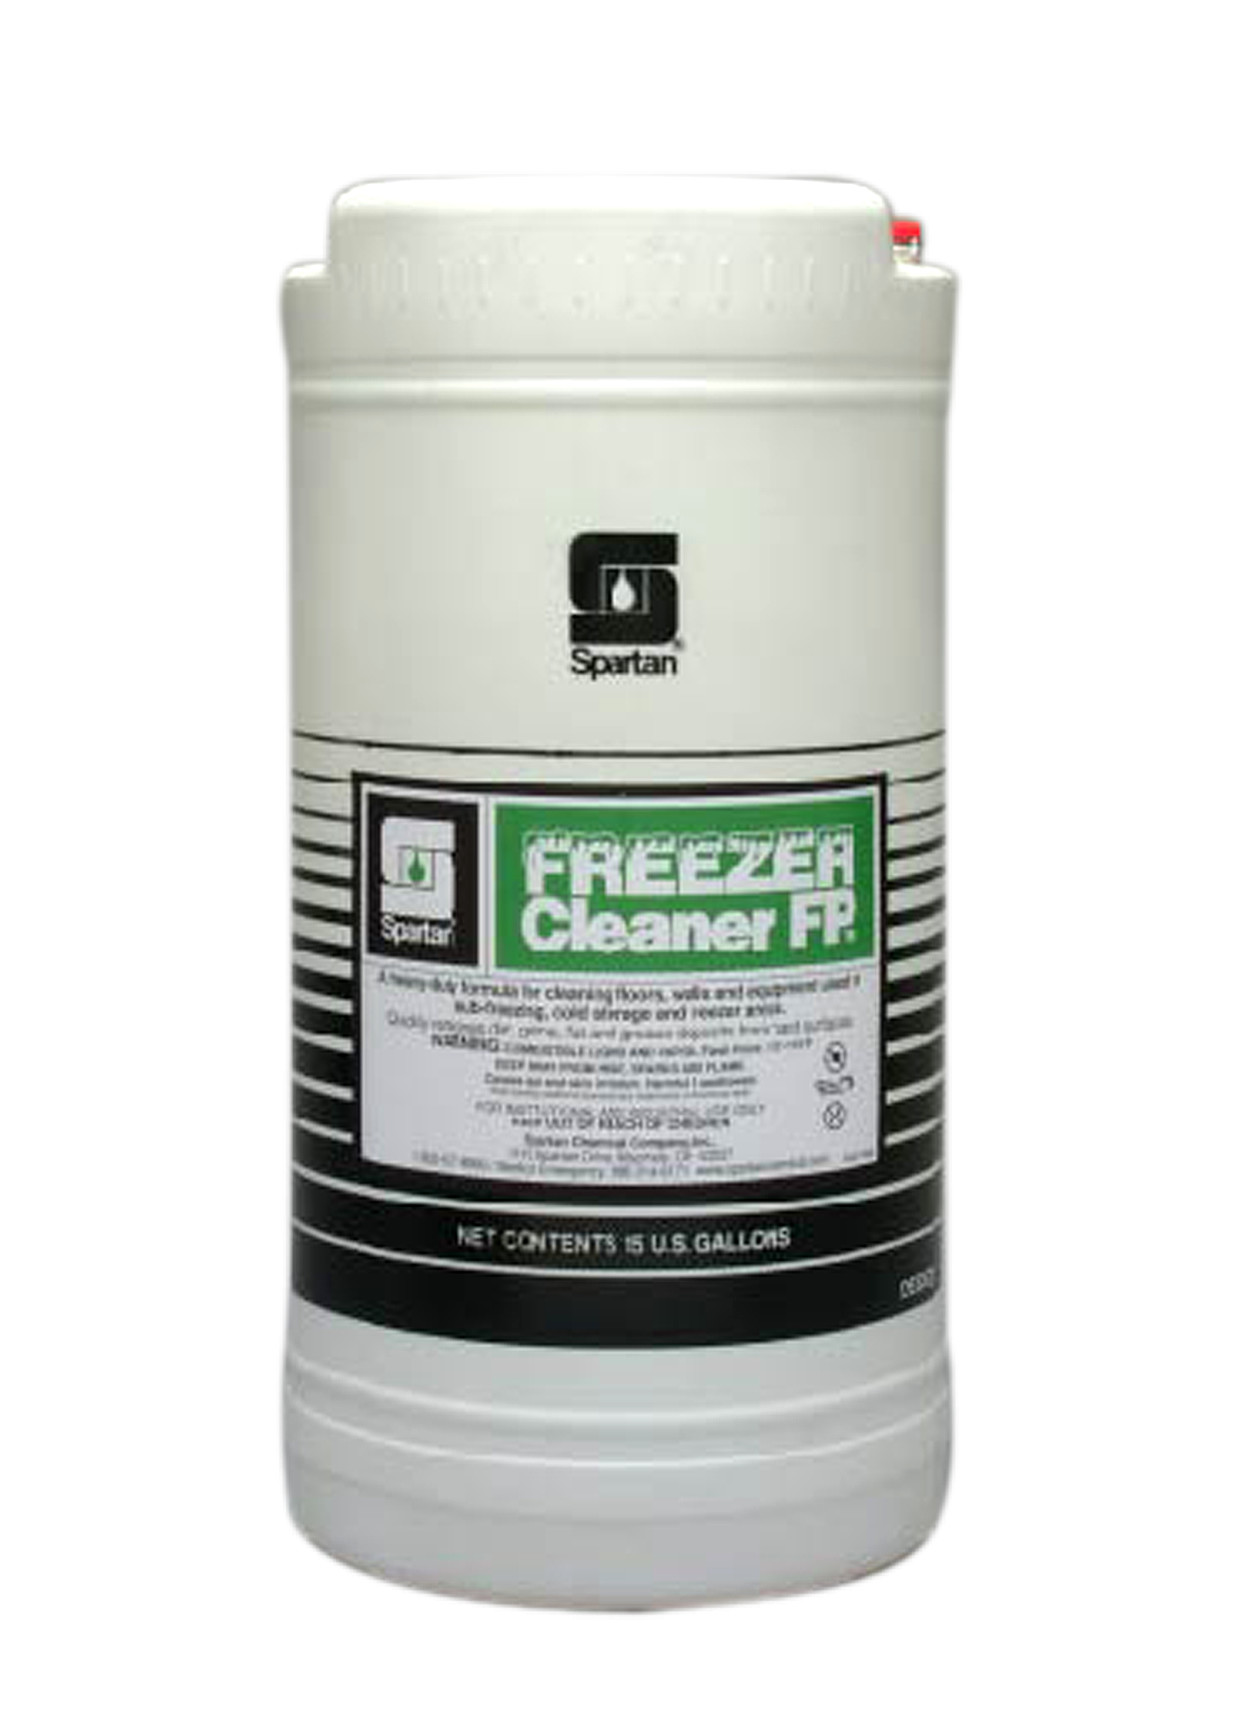 Spartan Chemical Company Freezer Cleaner FP, 15 GAL DRUM